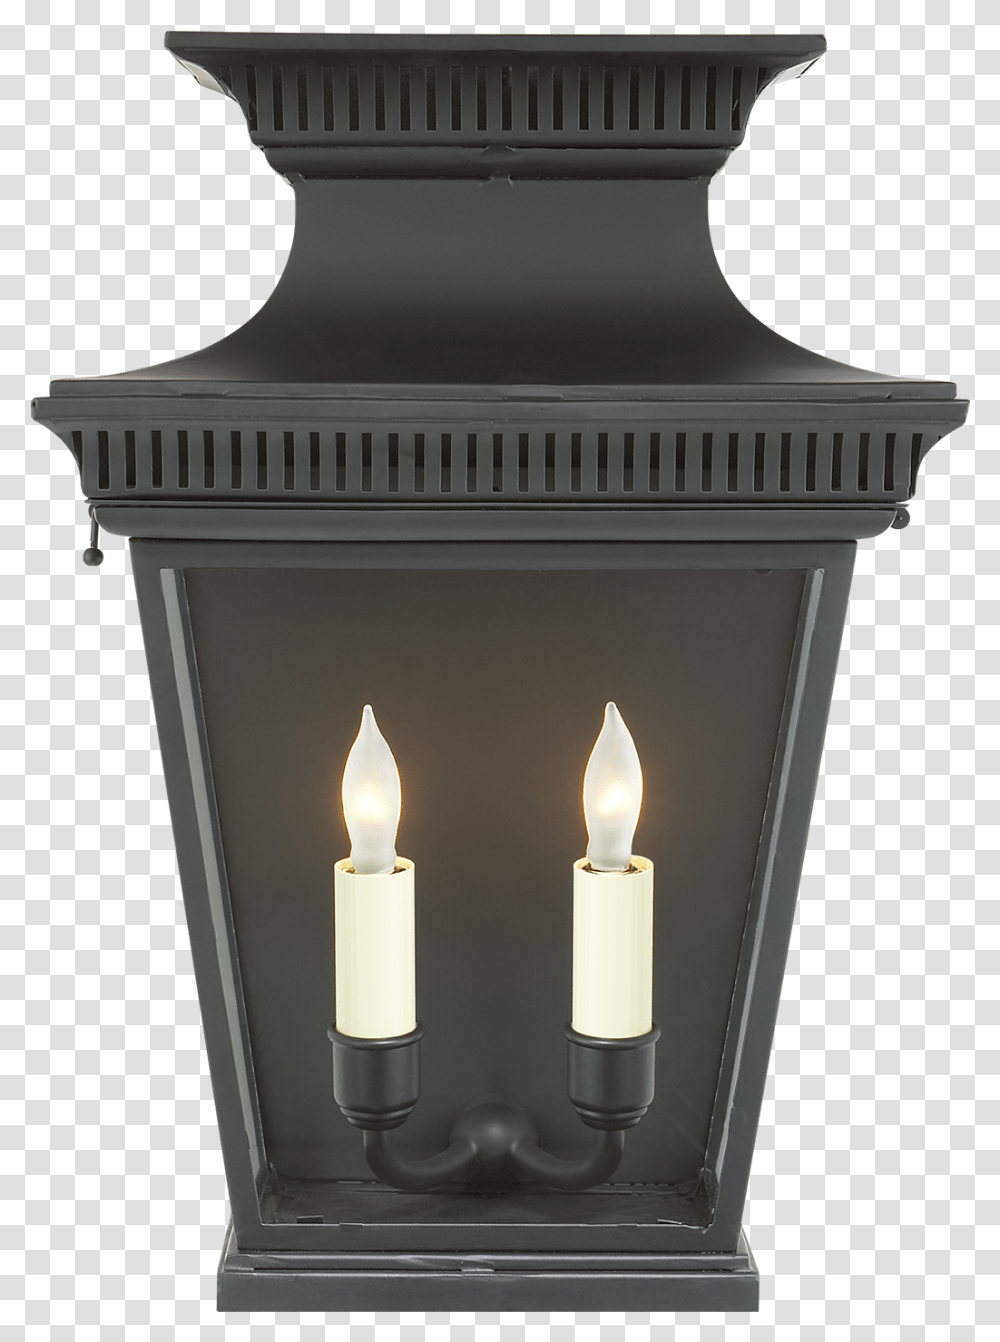 Wall Of Fire Elsinore 34 Wall Lantern In Black Pagoda, Lamp, Candle, Light Fixture Transparent Png